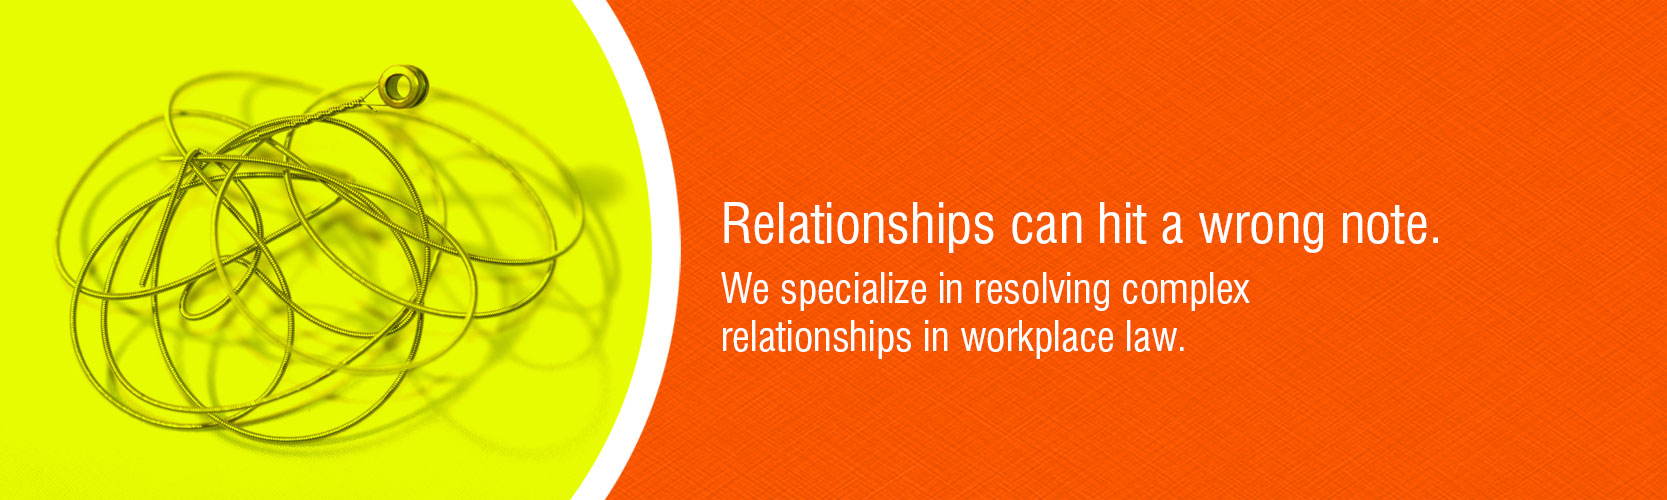 Relationships can hit a wrong note. We specialize in resolving complex relationships in workplace law and family law.